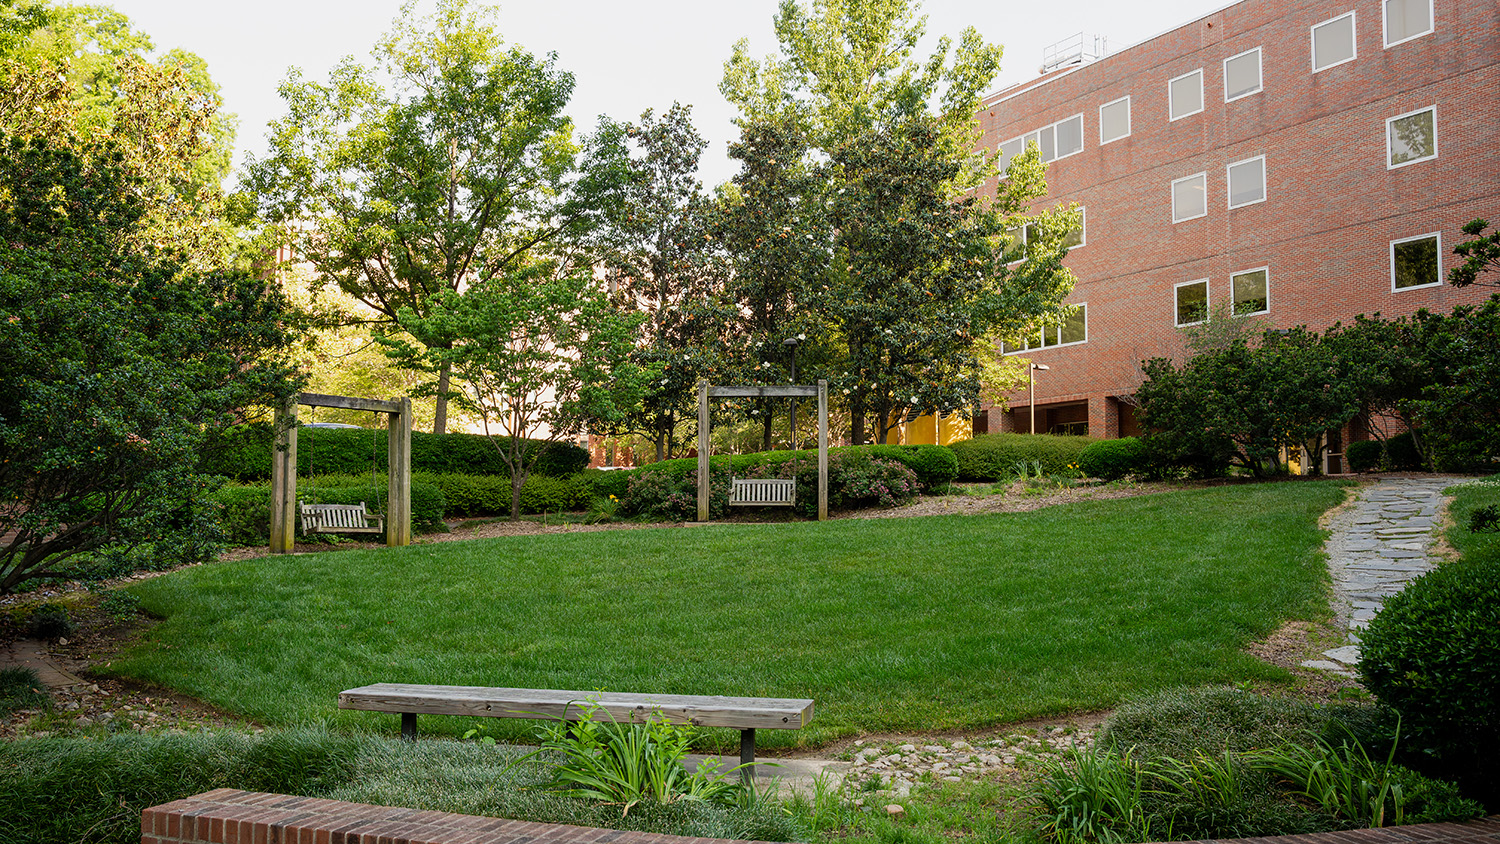 The Williams Courtyard will be renovated into an outdoor wellness space for NC State students.